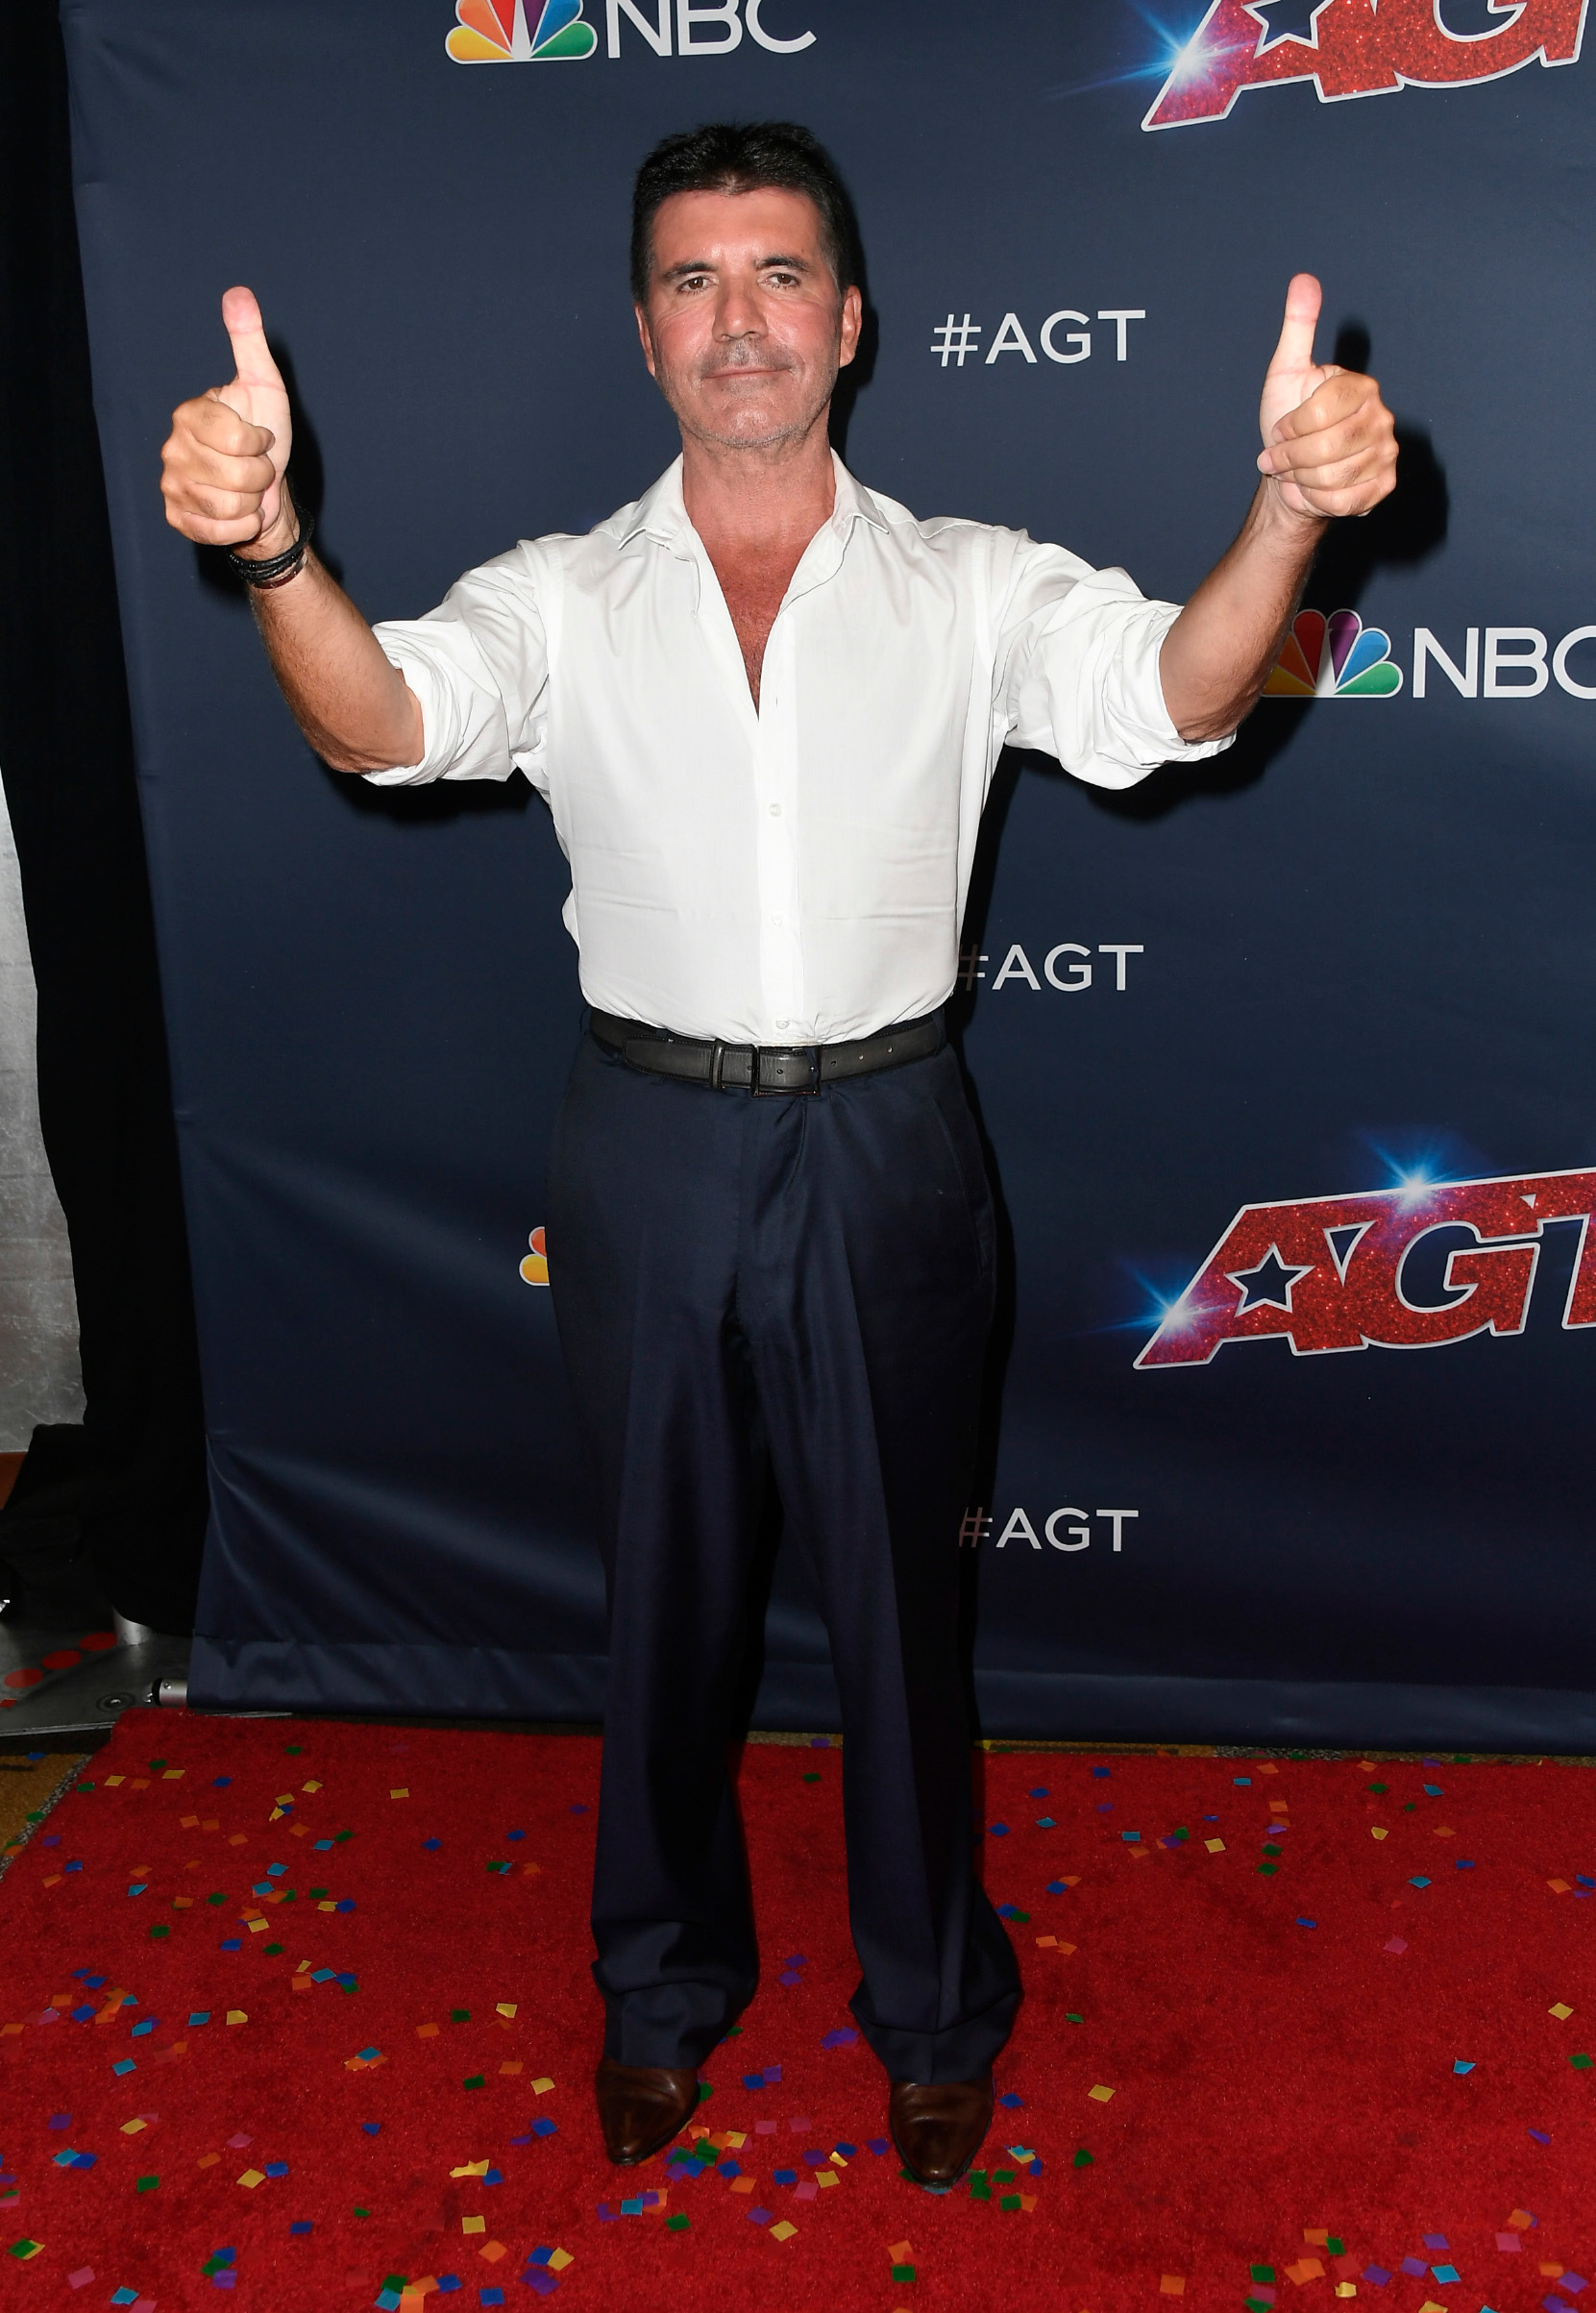 HOLLYWOOD, CALIFORNIA - SEPTEMBER 18: Simon Cowell attends 